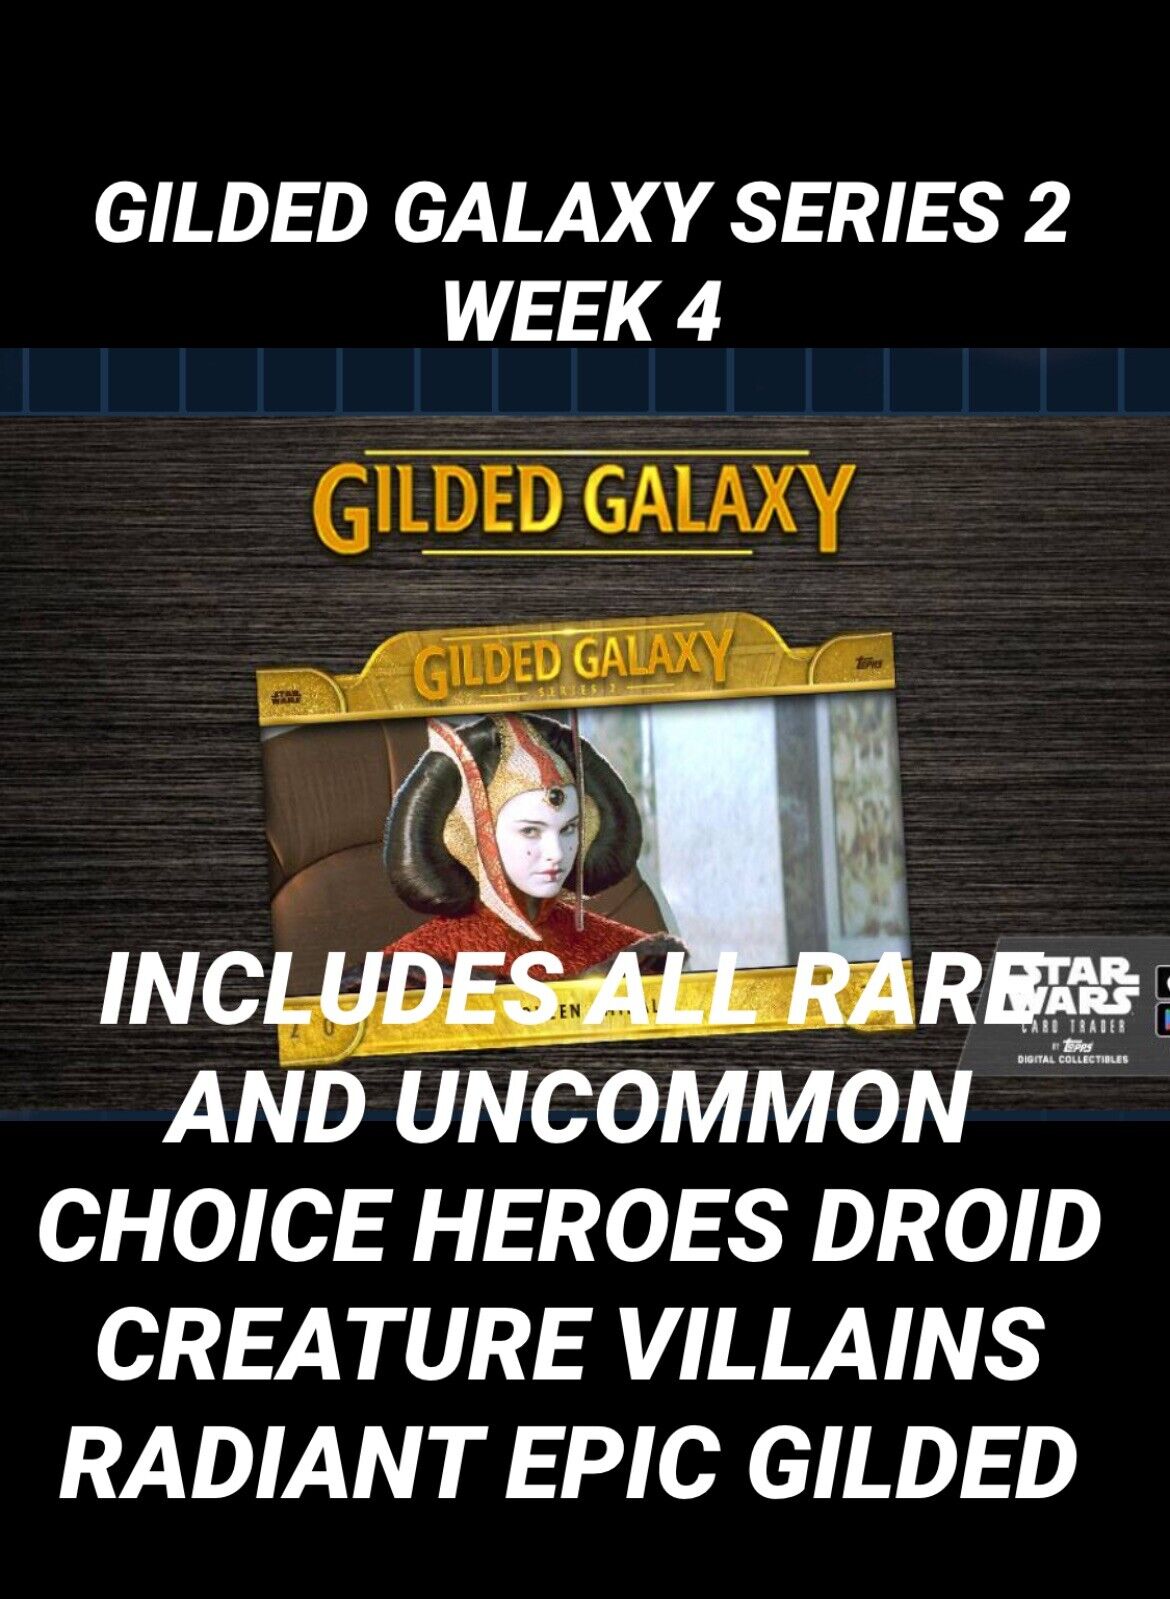 topps star wars card Trader GILDED GALAXY WEEK 4 All UC RARE And EPIC GILDED